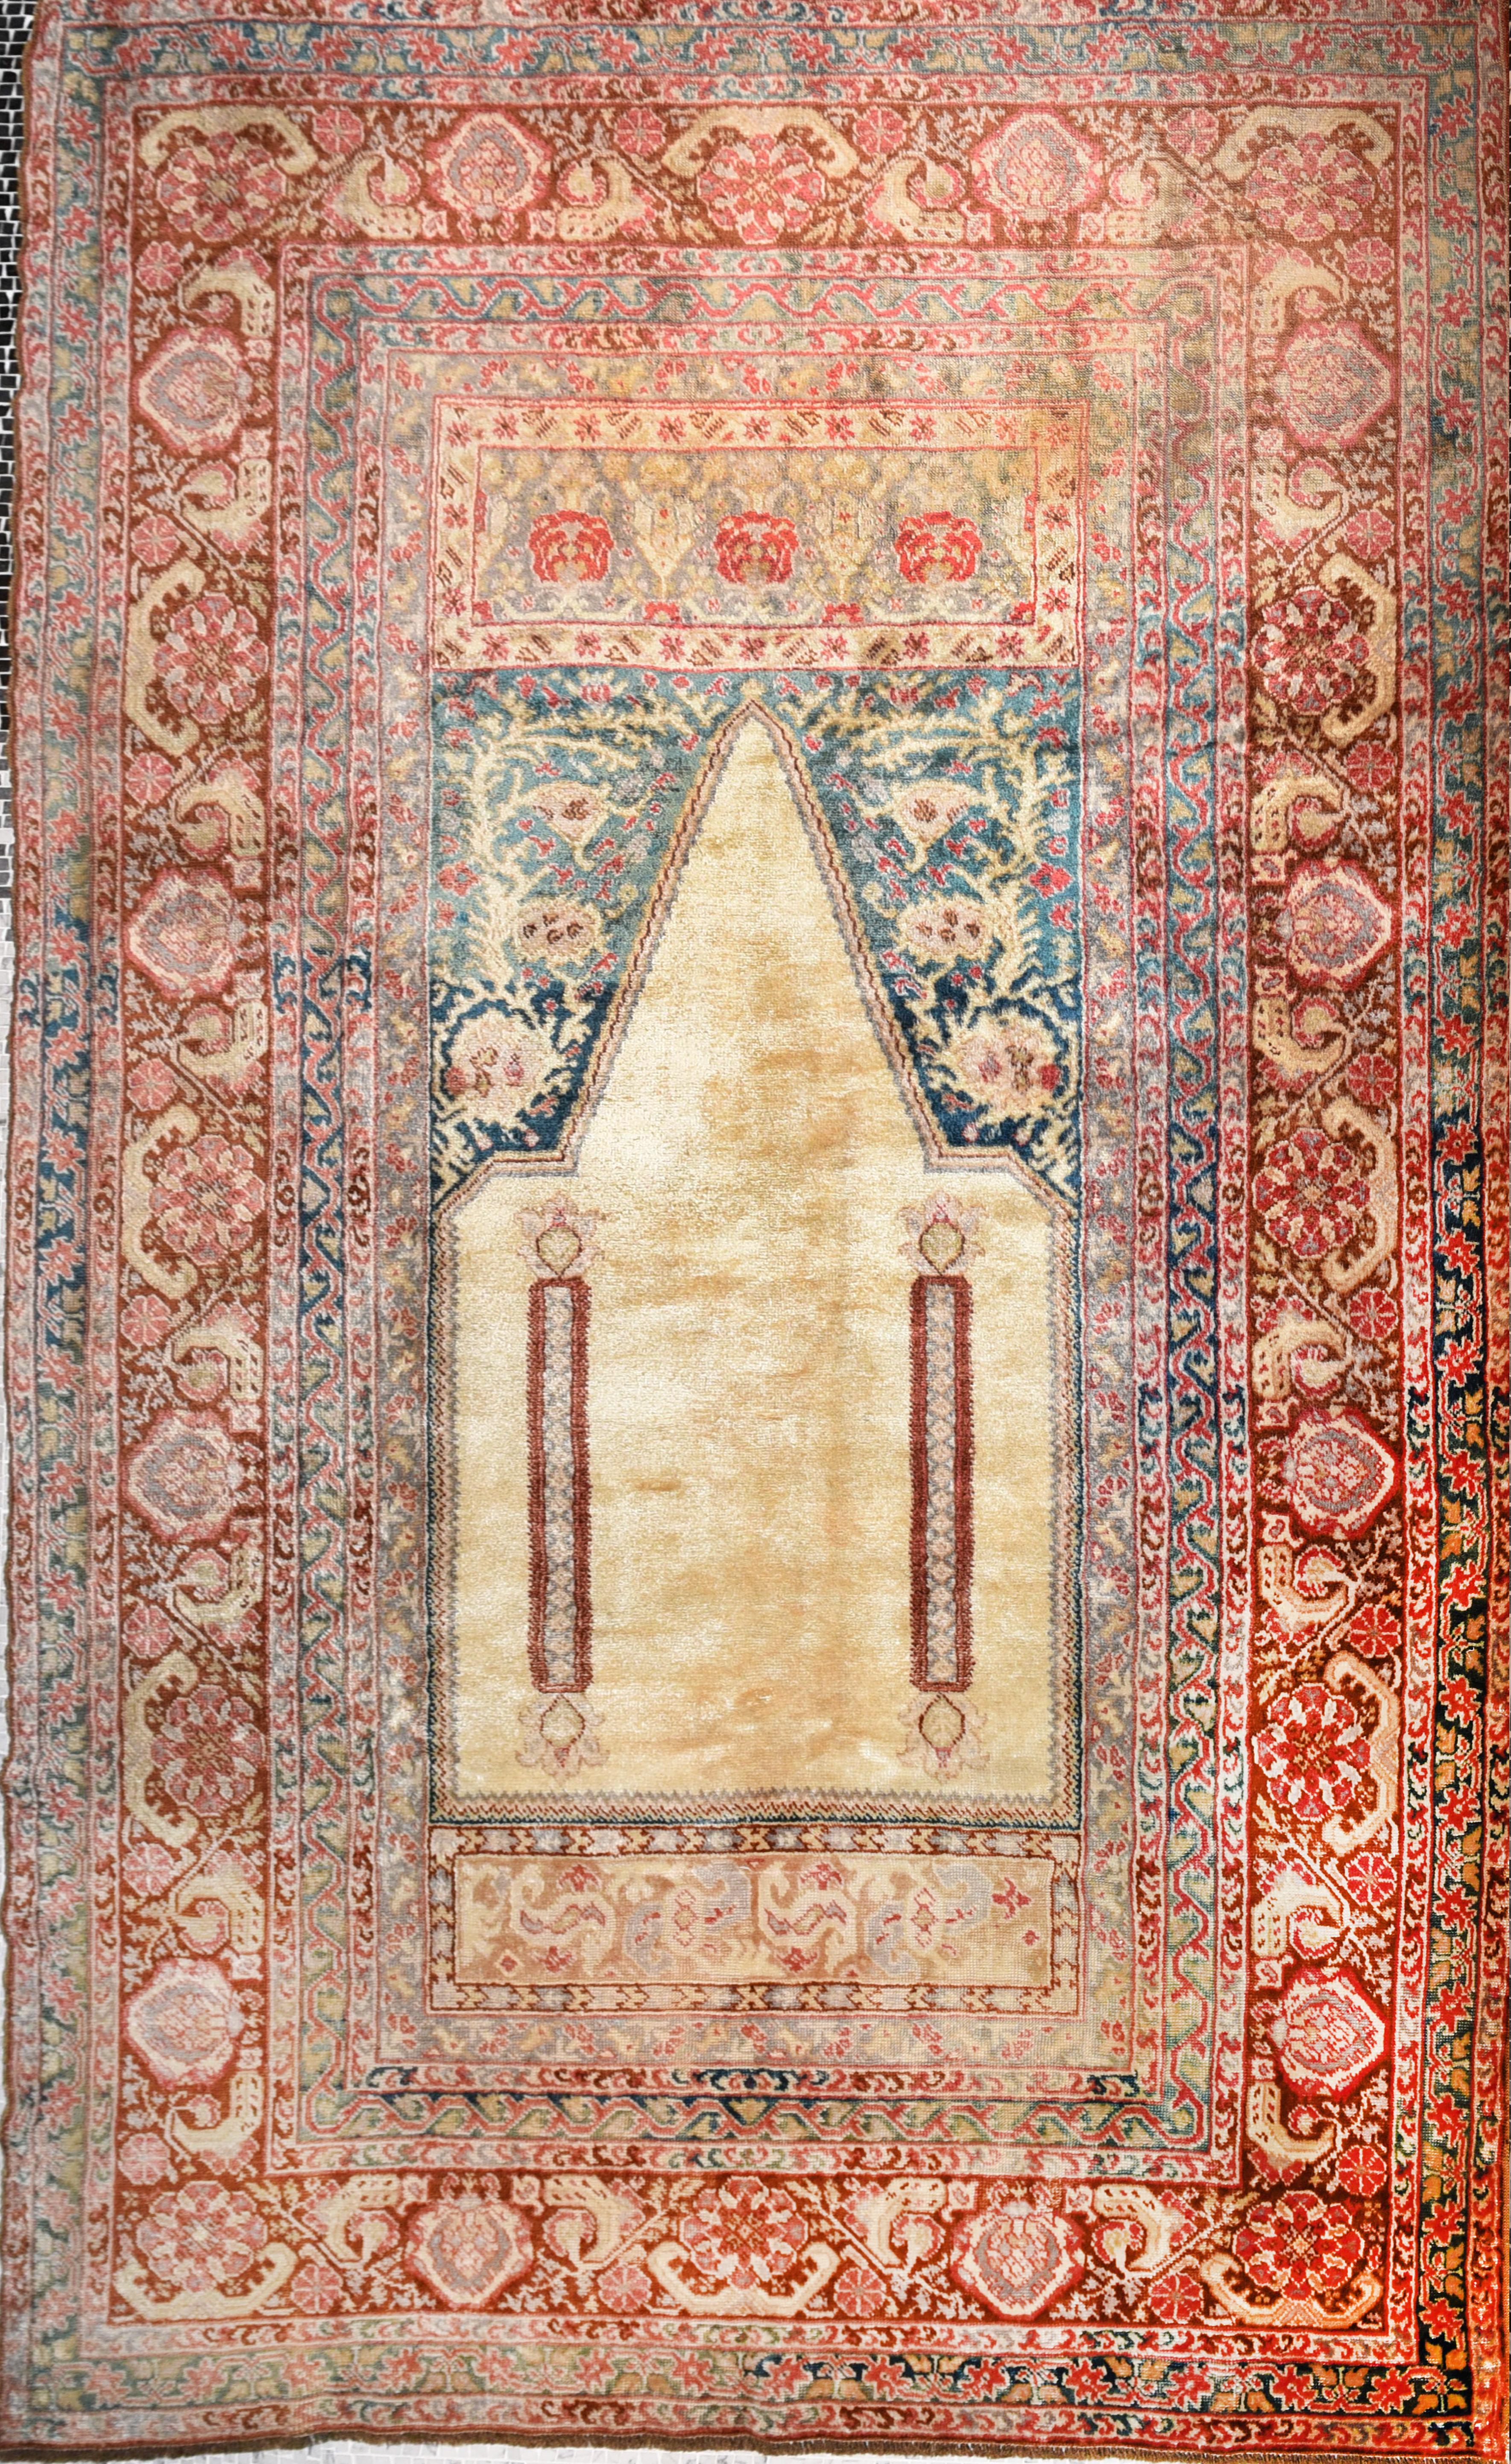 Hand-Knotted Antique Turkish Rug Angora Moher Wool, Hand Knotted, circa 1890